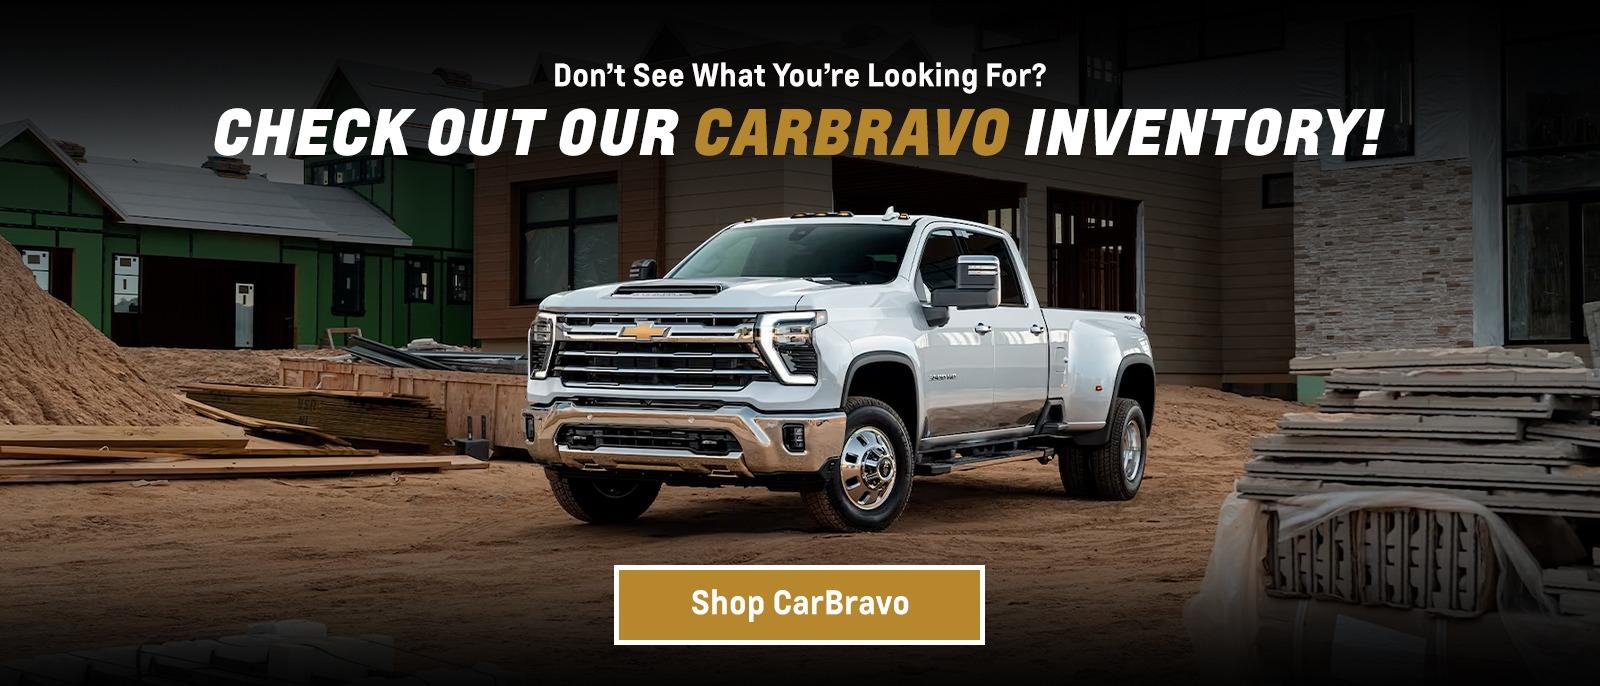 Don't See What You're Looking For? Check Out Our CarBravo Inventory!